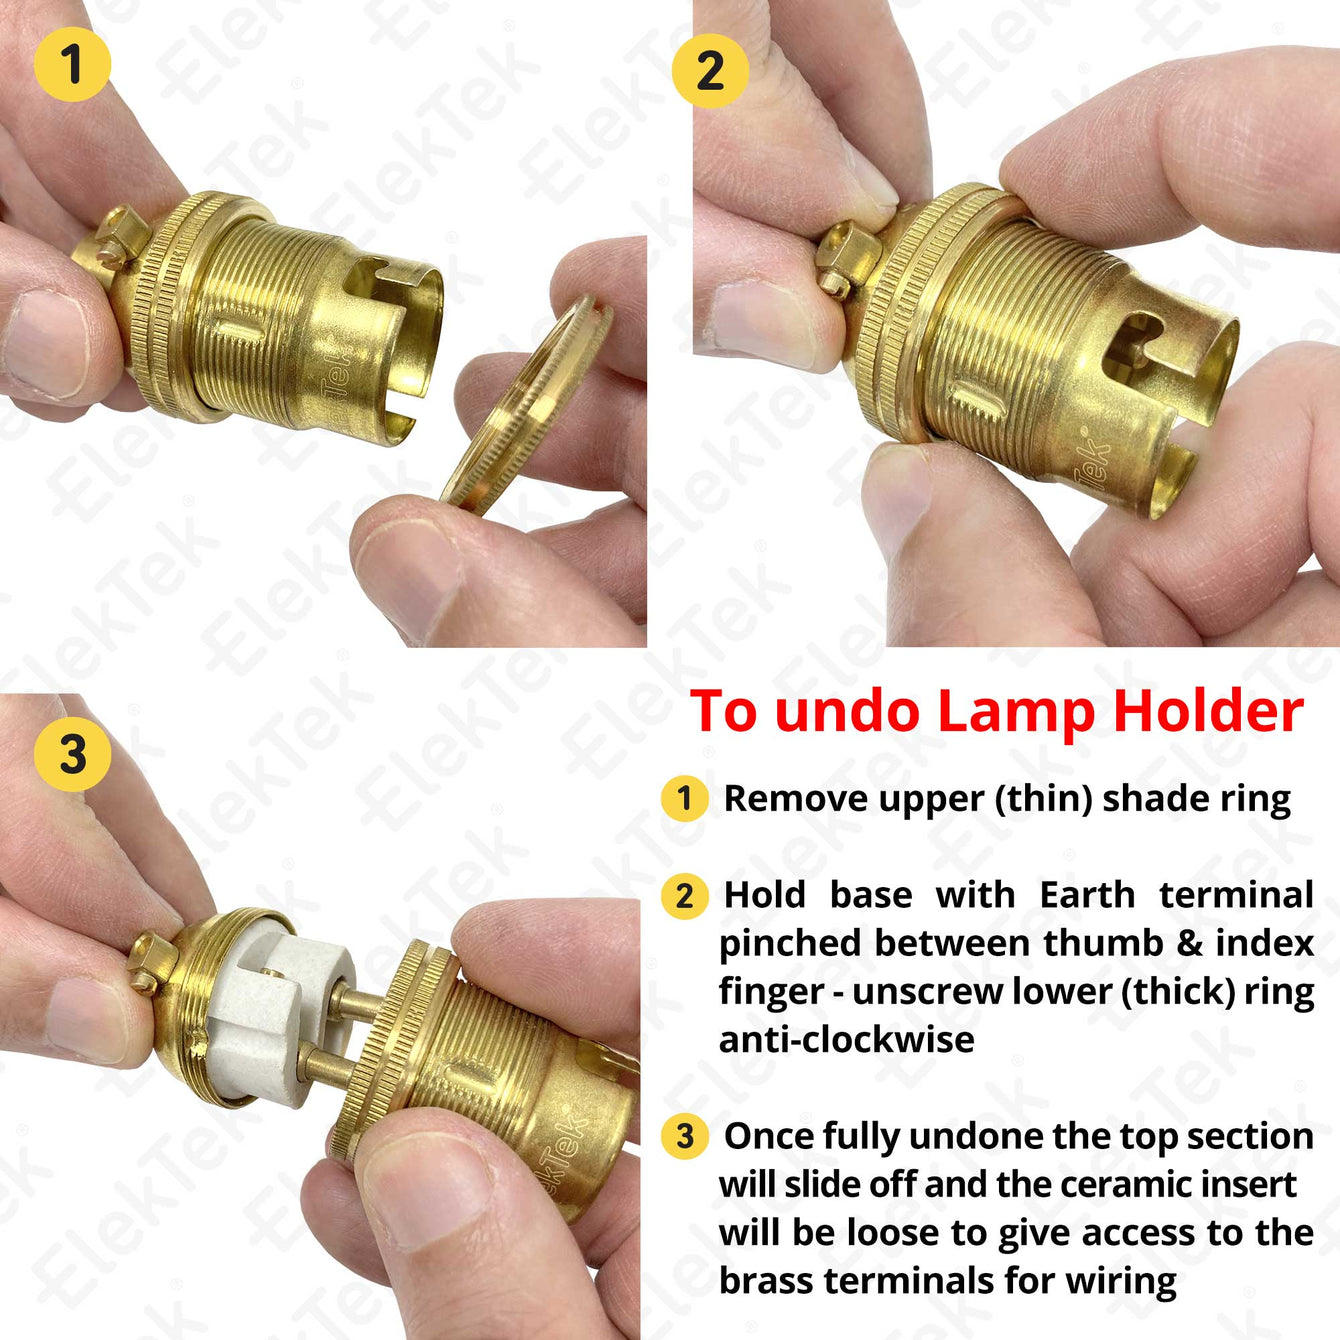 ElekTek Lamp Holder Half Inch Bayonet Cap B22 Unswitched With Shade Ring Wood Nipple Solid Brass Chrome